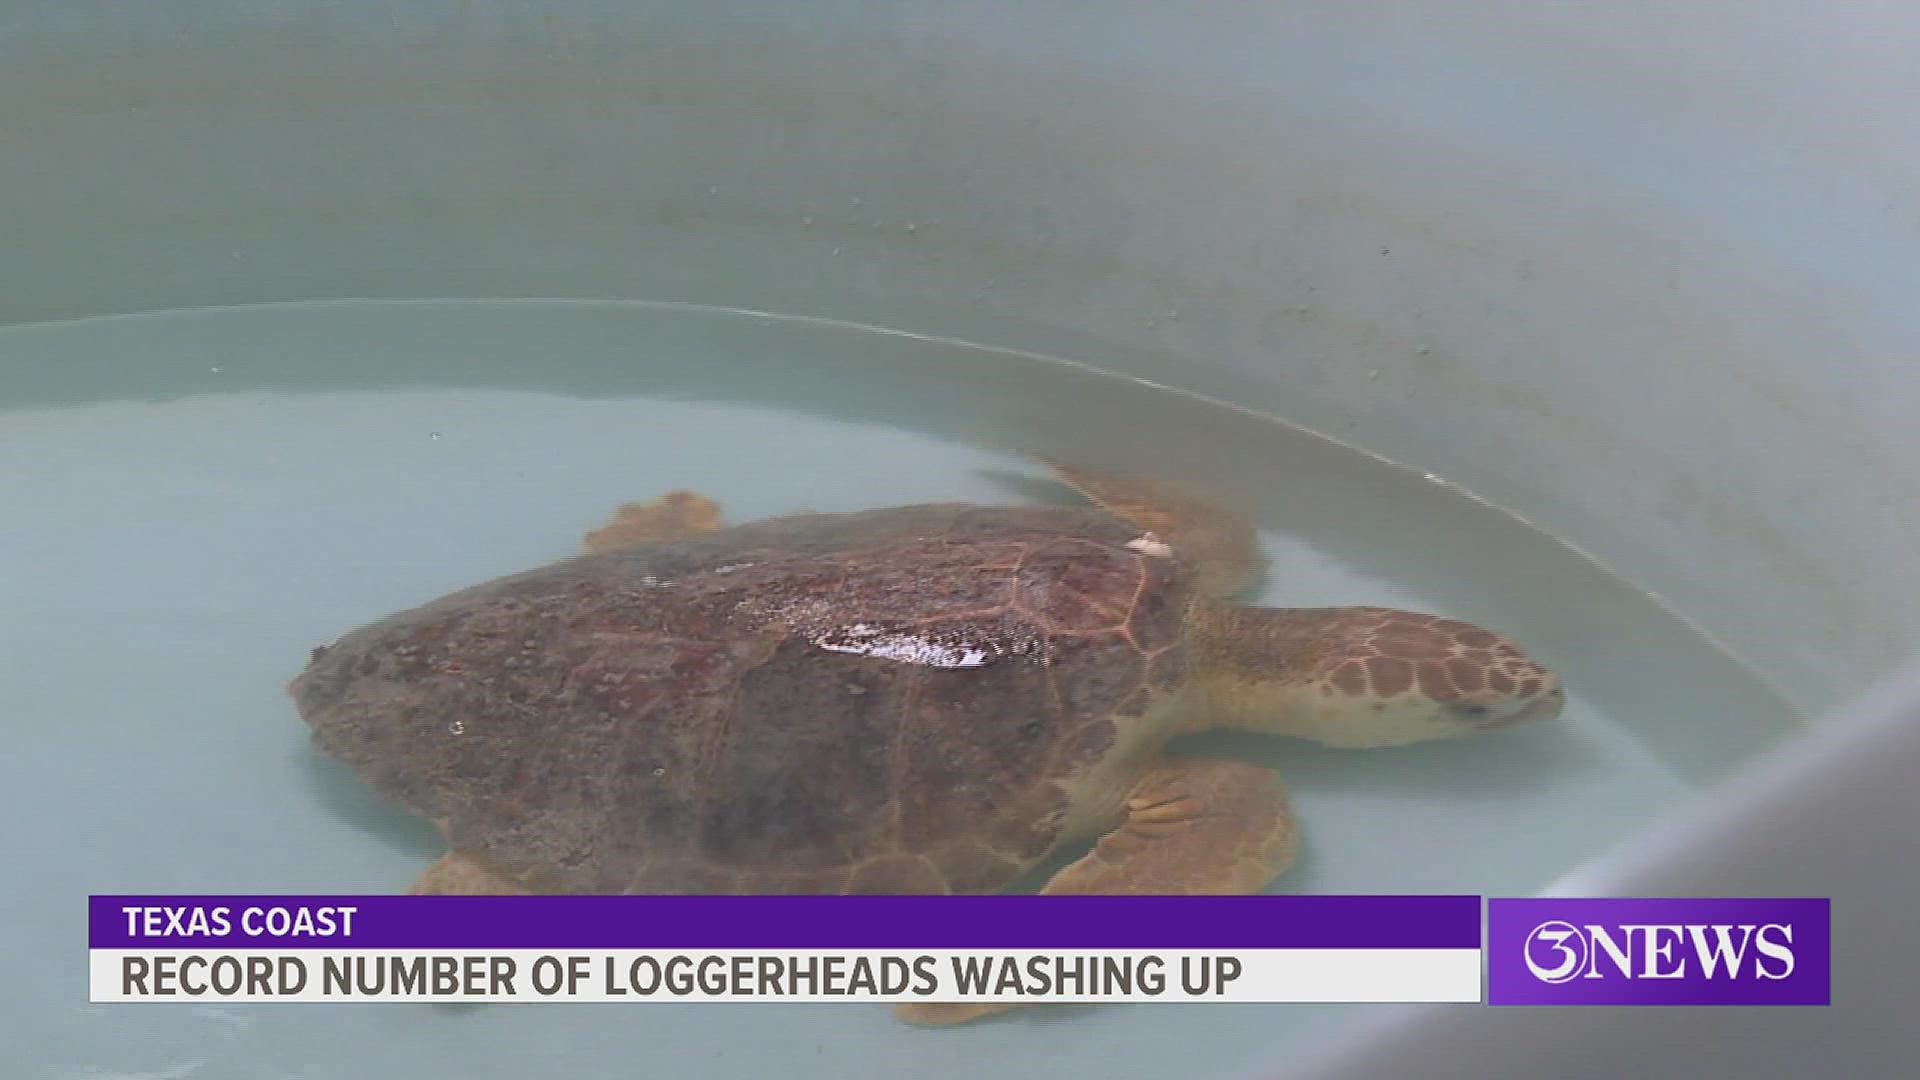 In four months, 282 loggerheads have stranded in Texas, mostly in the Coastal Bend, according to the the U.S. Fish and Wildlife Service.